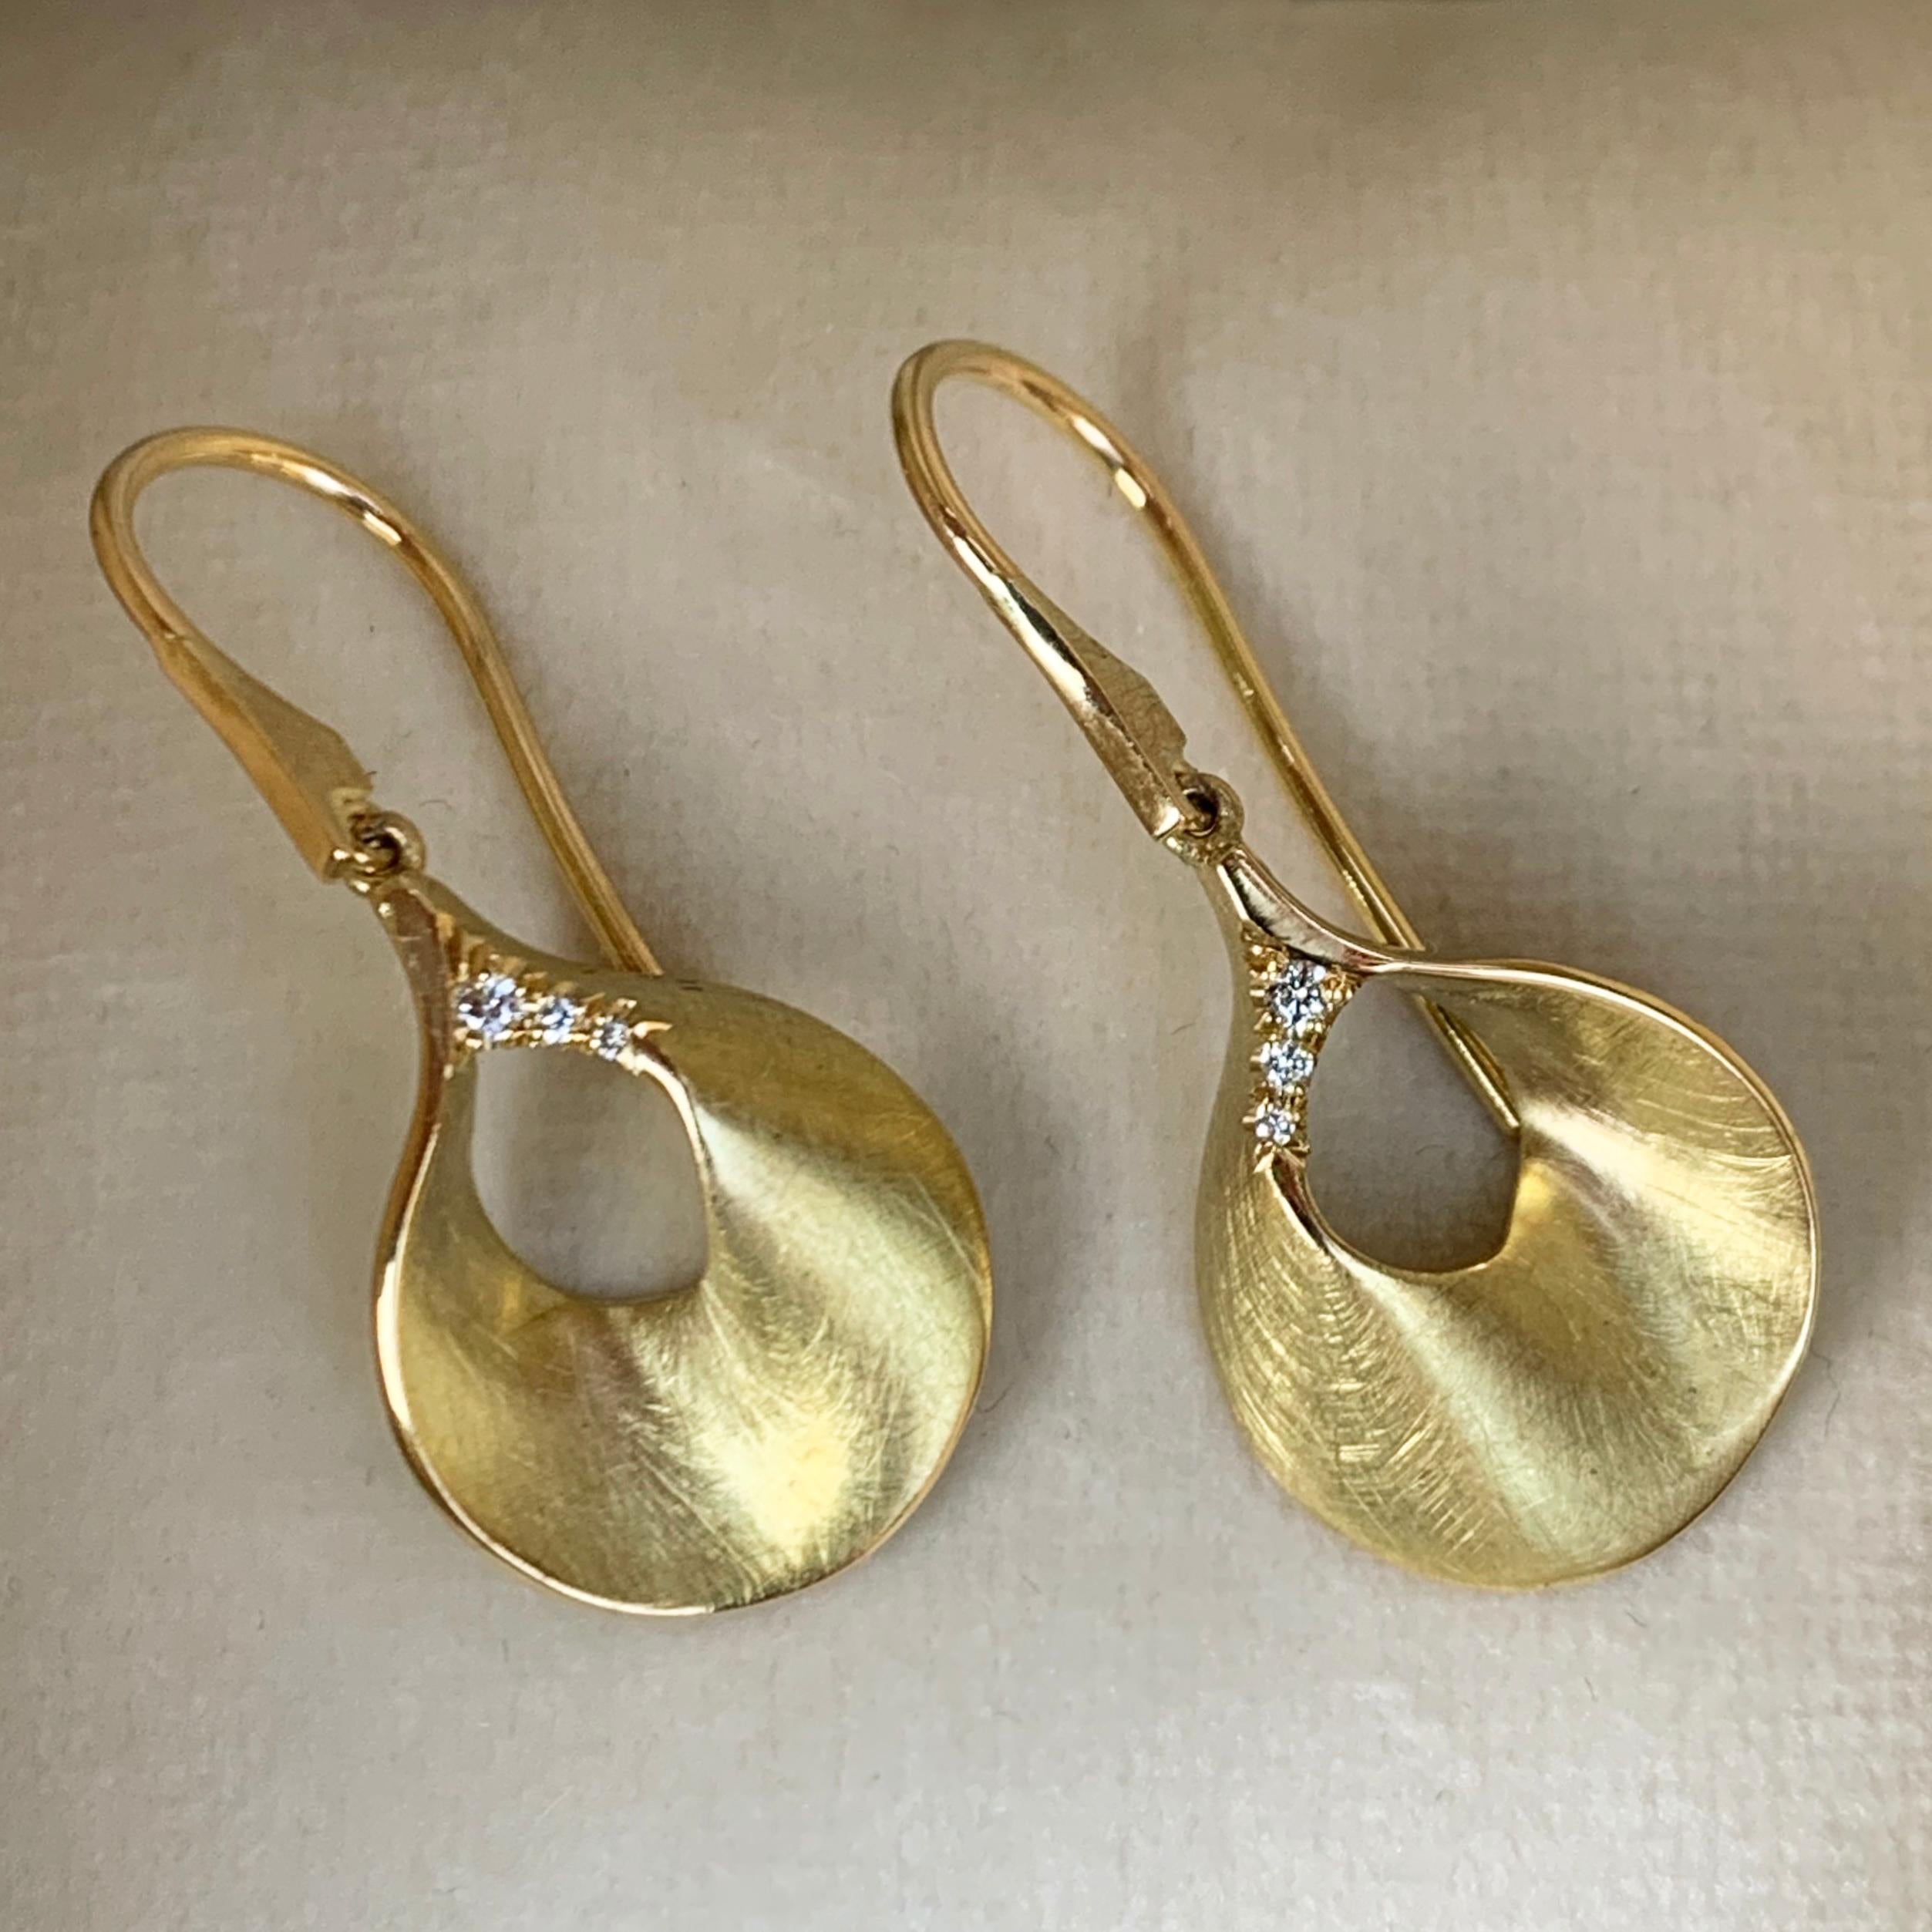 Drop earrings handmade in Belgium, in 18K matte-finished yellow gold 5.7 g.  Pave set with 6 white brilliant-cut DEGVVS diamonds 0,05 ct.  These earrings are from the 'Euphoria' Collection.
This exquisite product comes from Joke Quick, a jewellery